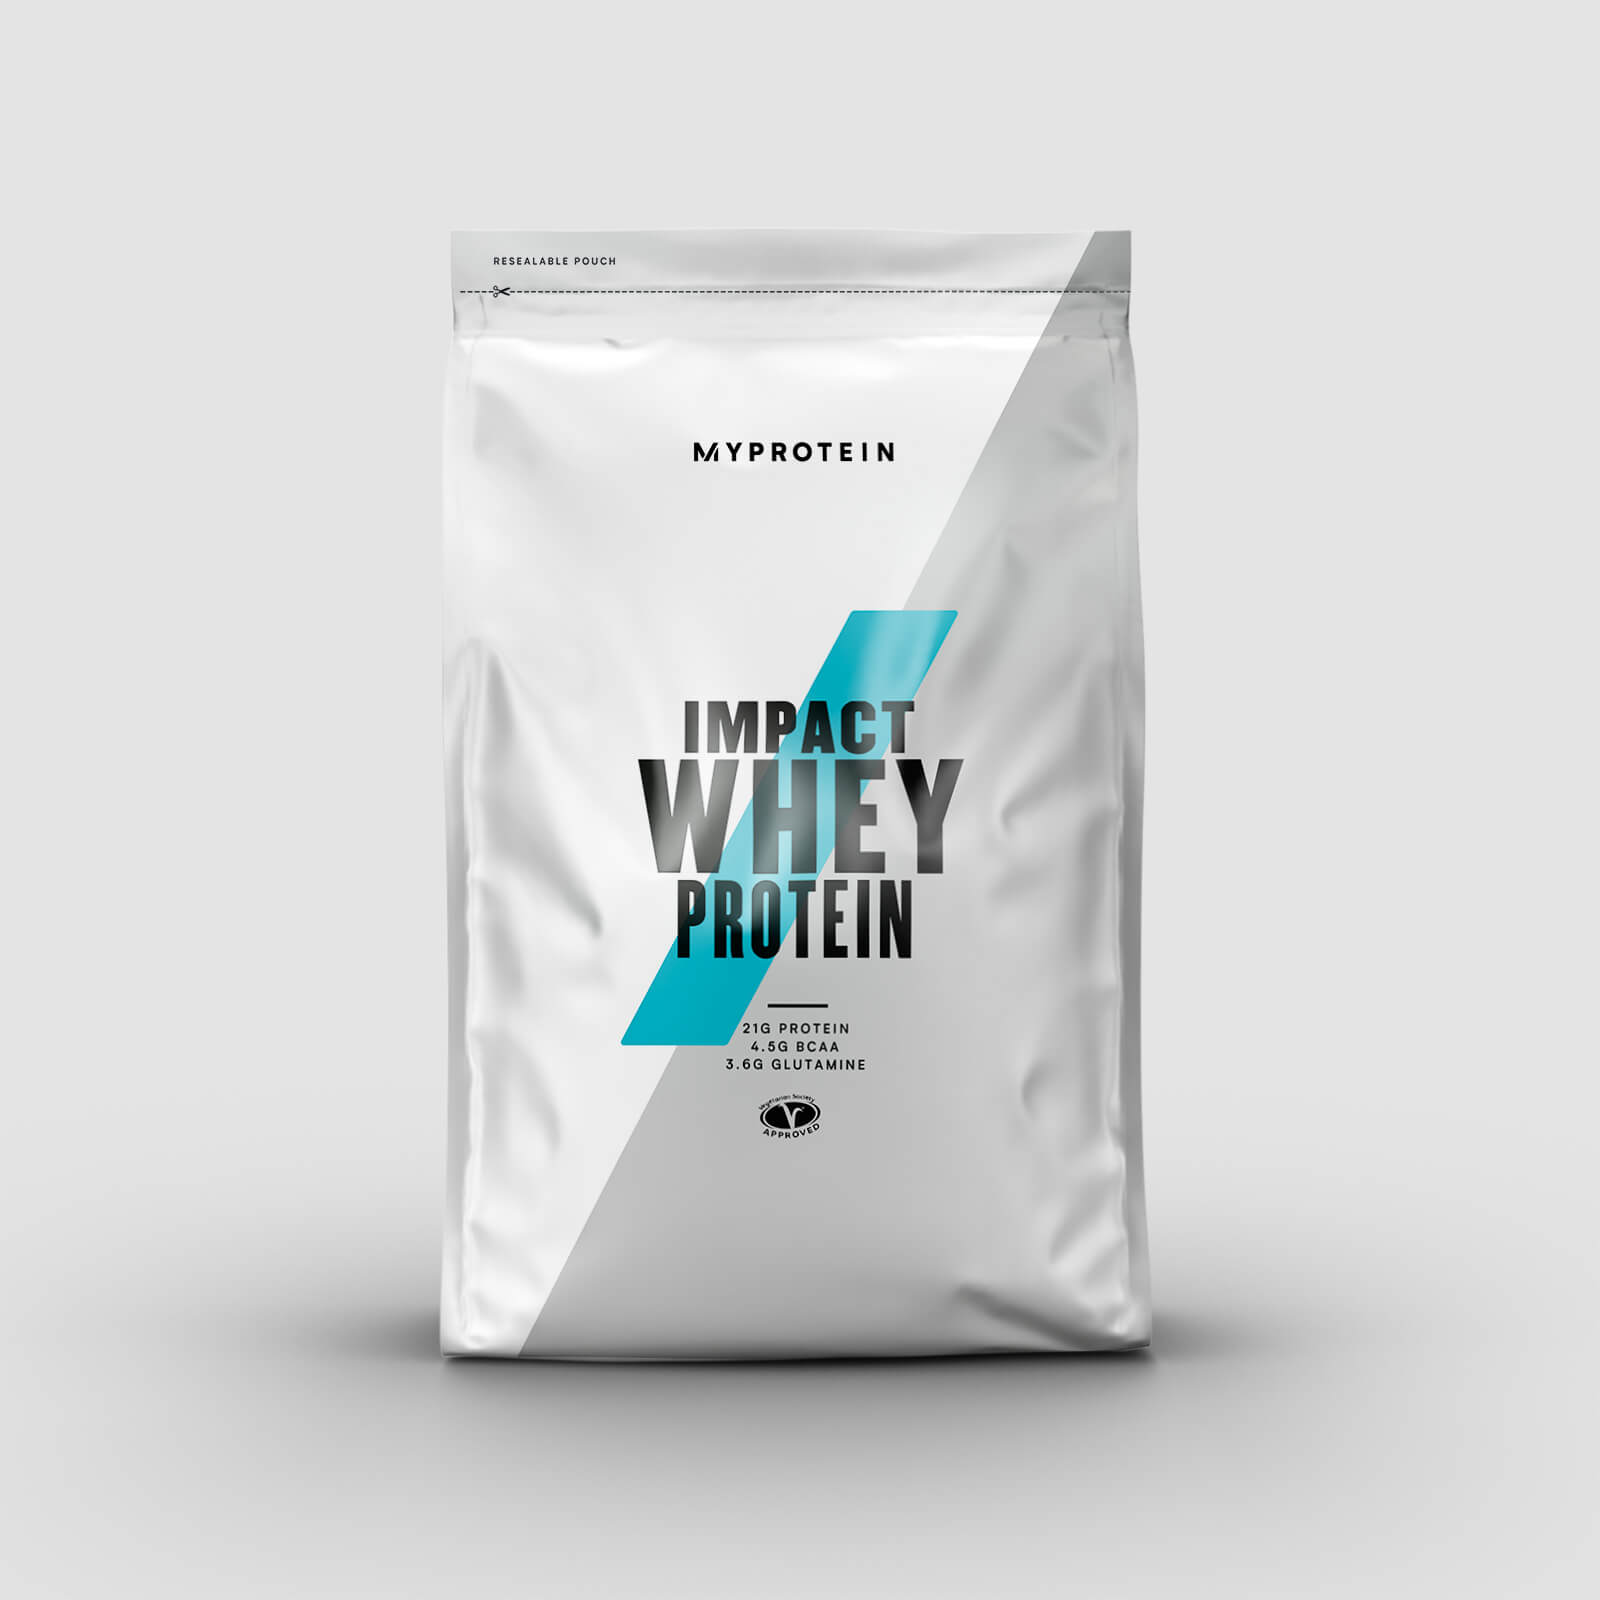 Myprotein Vassleprotein - Impact Whey Protein - 5kg - Chocolate Coconut - New and Improved